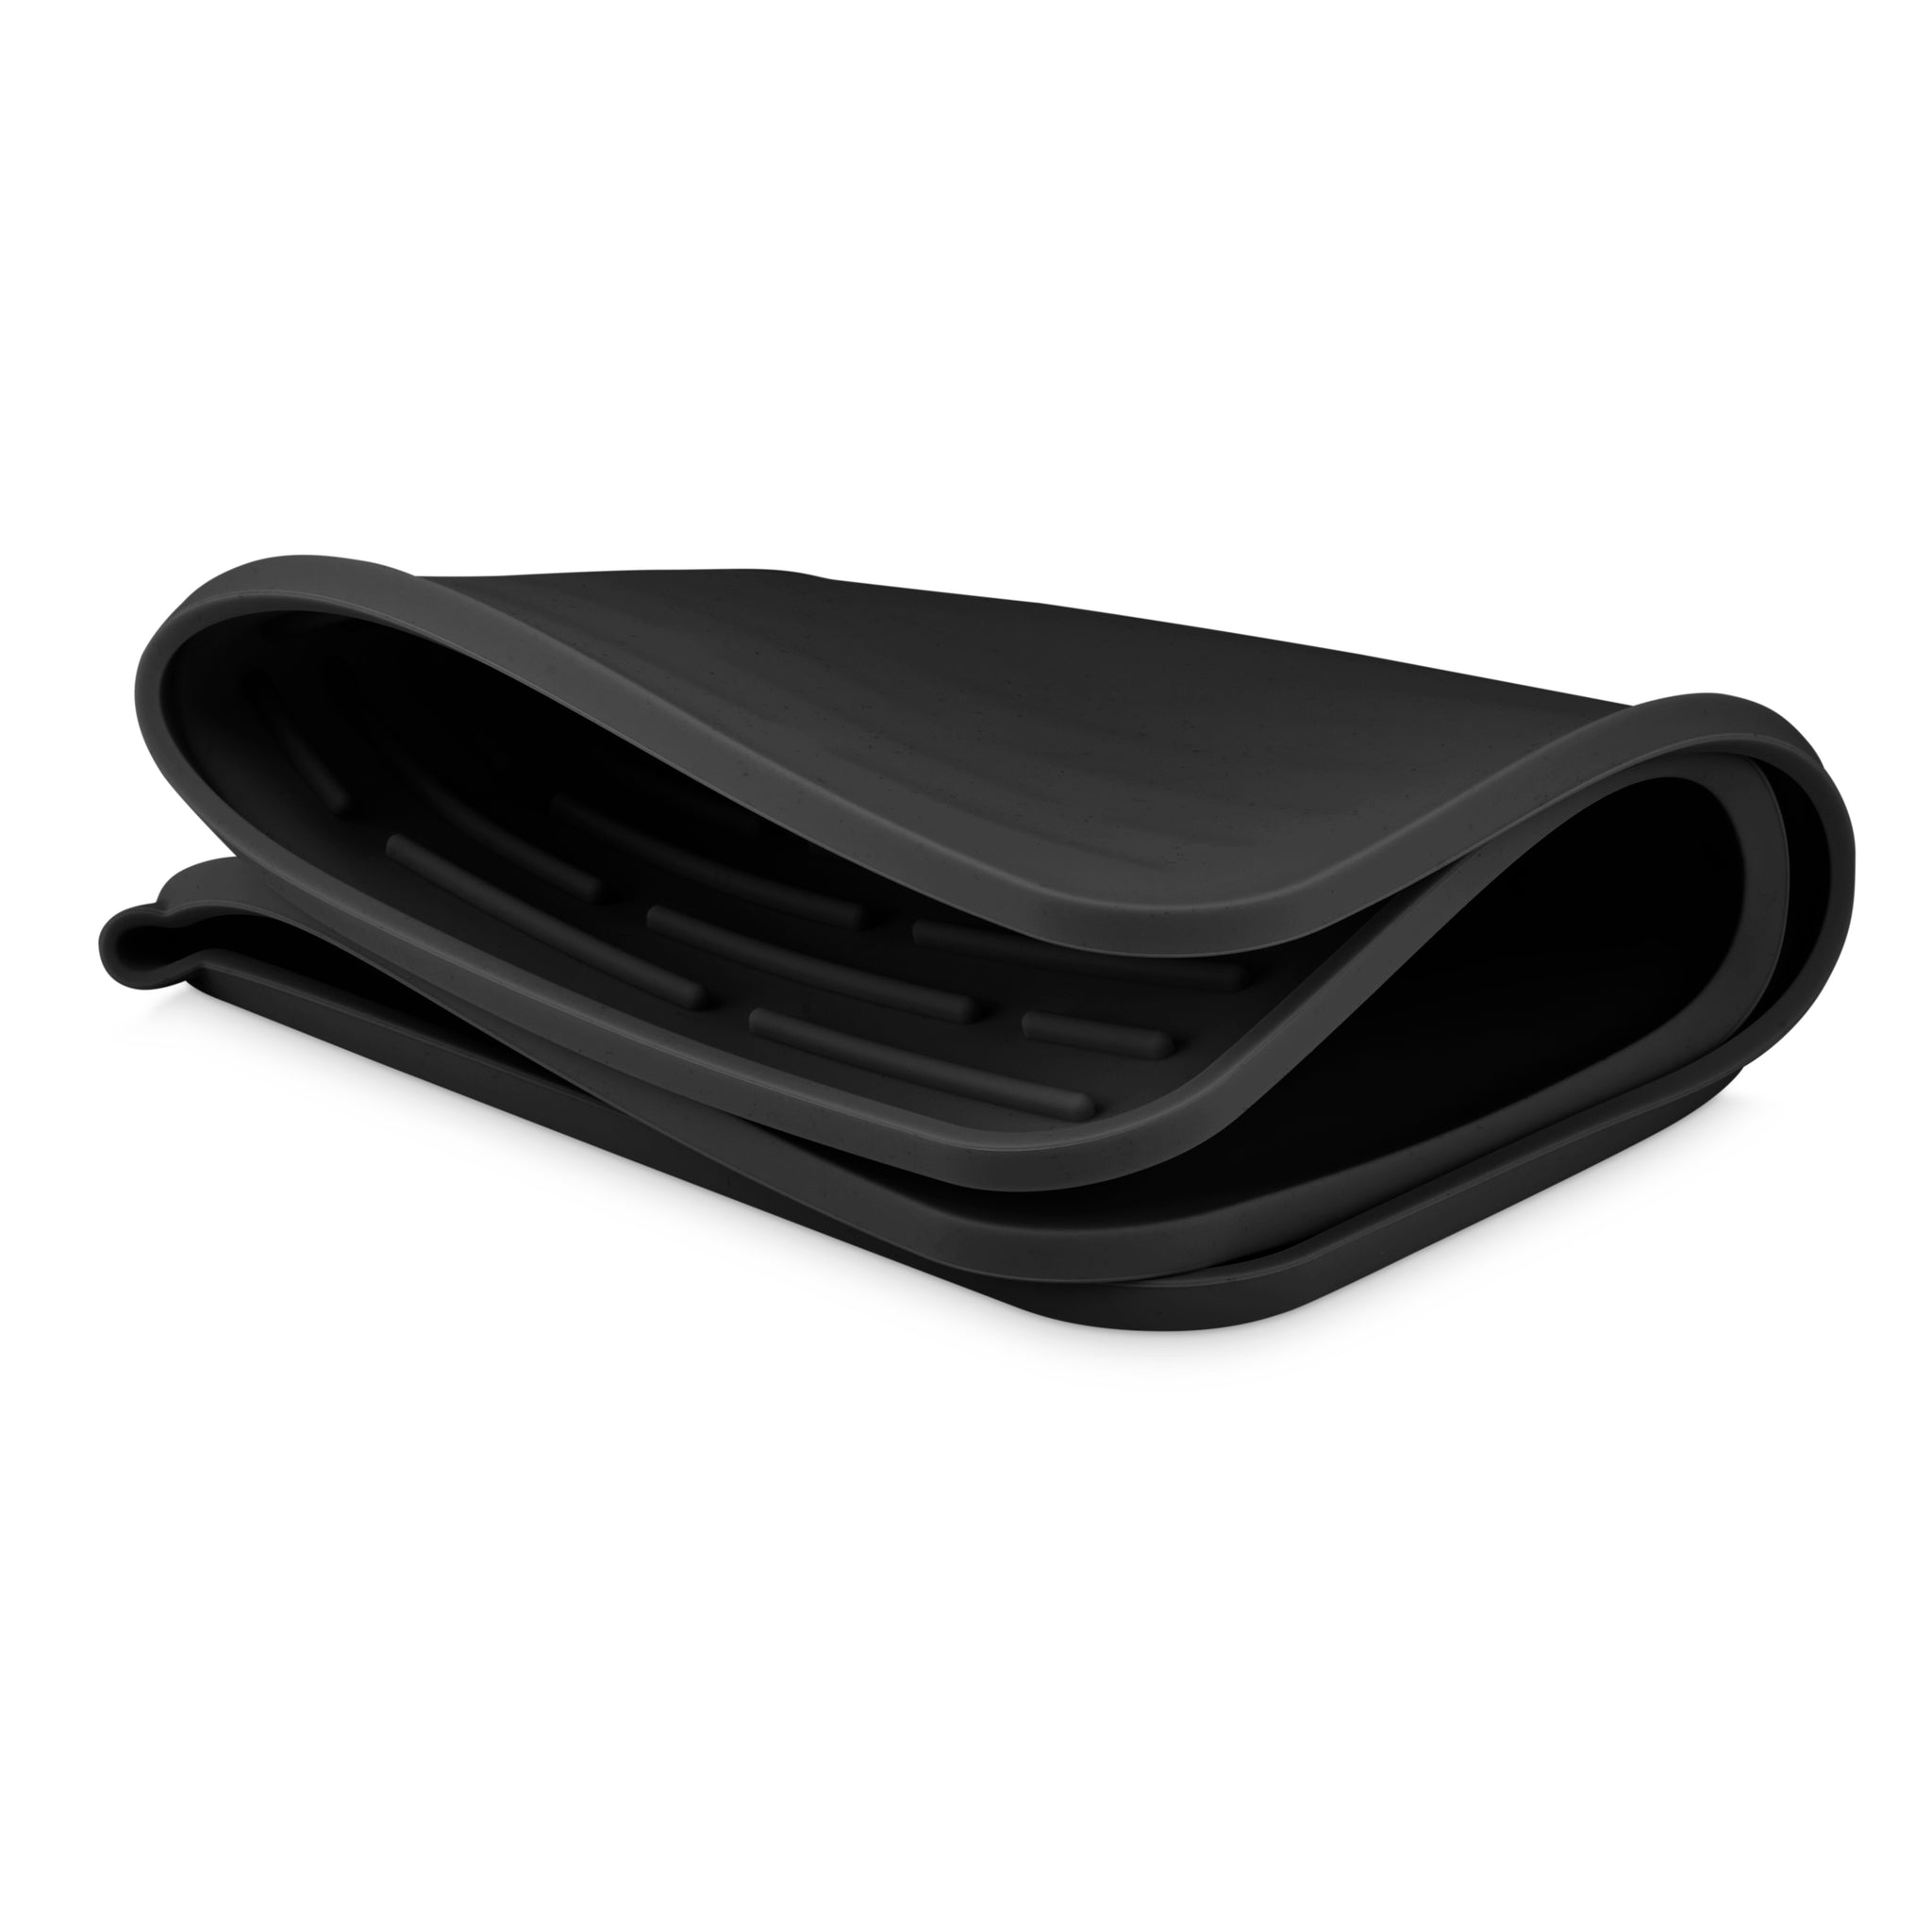 DESIGNSTUFF - Folding Silicone Drying Mat Large with Drainage Mouth - Black